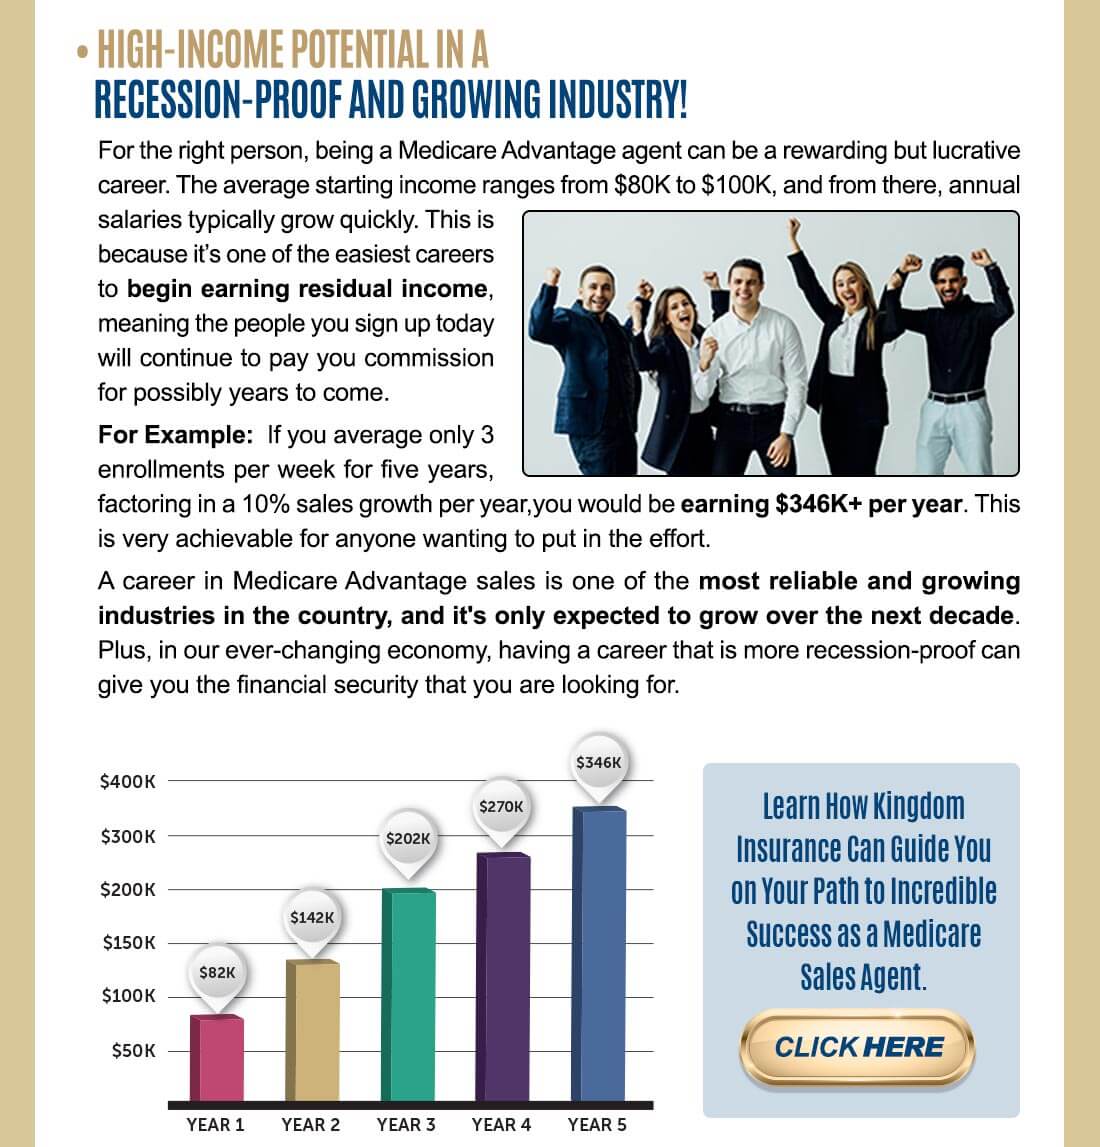 HIGH-INCOME POTENTIAL IN A RECESSION-PROOF AND GROWING INDUSTRY! For the right person, being a Medicare Advantage agent can be a rewarding but lucrative career. The average starting income ranges from $80K to $100K, and from there, annual salaries typically grow quickly. This is because it's one of the easiest careers to begin earning residual income, meaning the people you sign up today will continue to pay you commission for possibly years to come. For Example: If you average only 3 enrollments per week for five years, factoring in a 10% sales growth per year,you would be earning $346K+ per year. This is very achievable for anyone wanting to put in the effort. A career in Medicare Advantage sales is one of the most reliable and growing industries in the country, and its only expected to grow over the next decade. Plus, in our ever-changing economy, having a career that is more recession-proof can give you the financial security that you are looking for. 